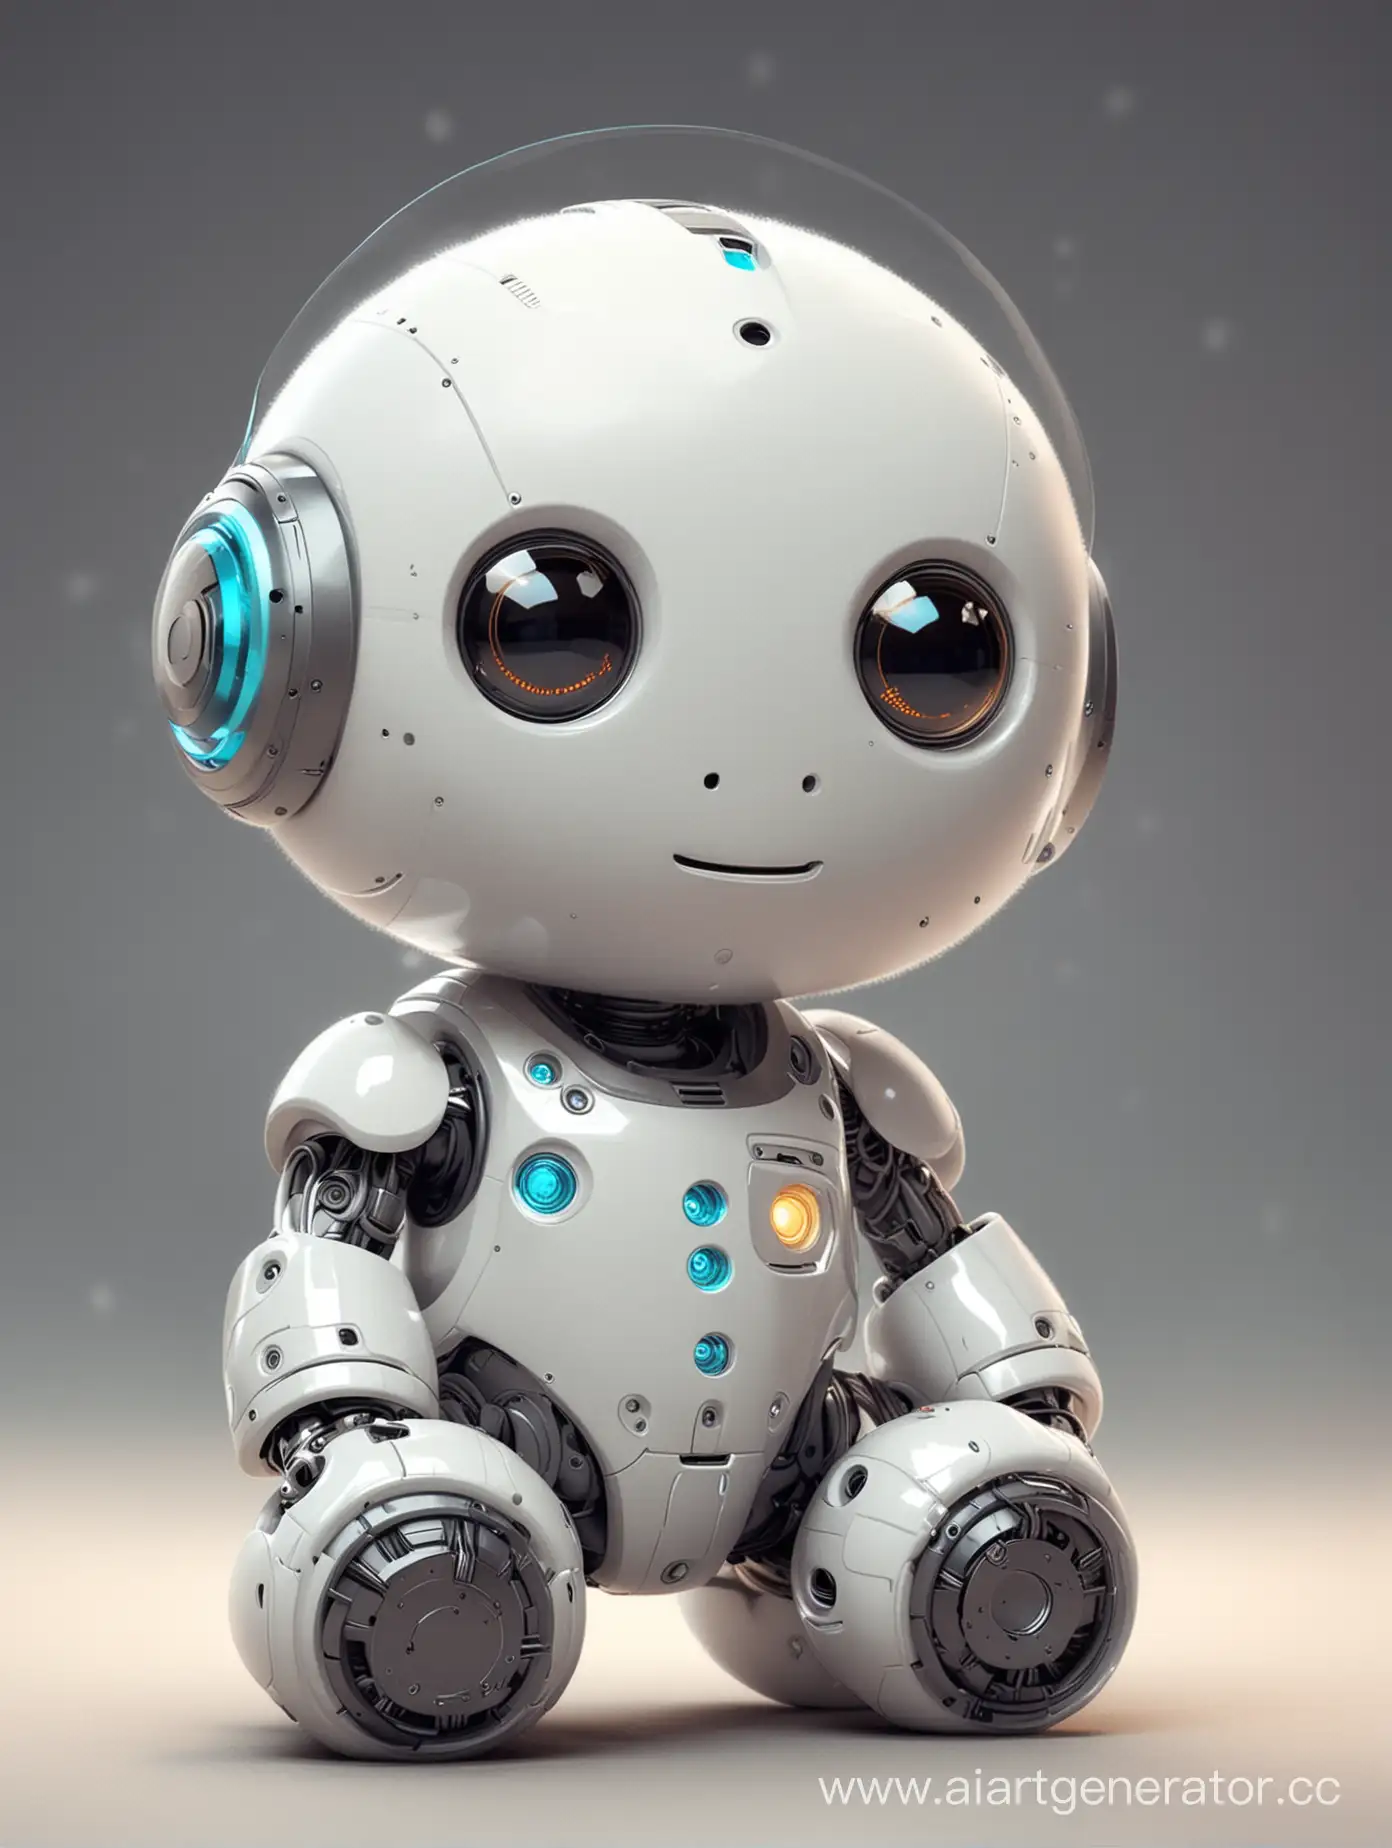 Adorable-Little-Robot-with-Cute-and-Cuddly-Design